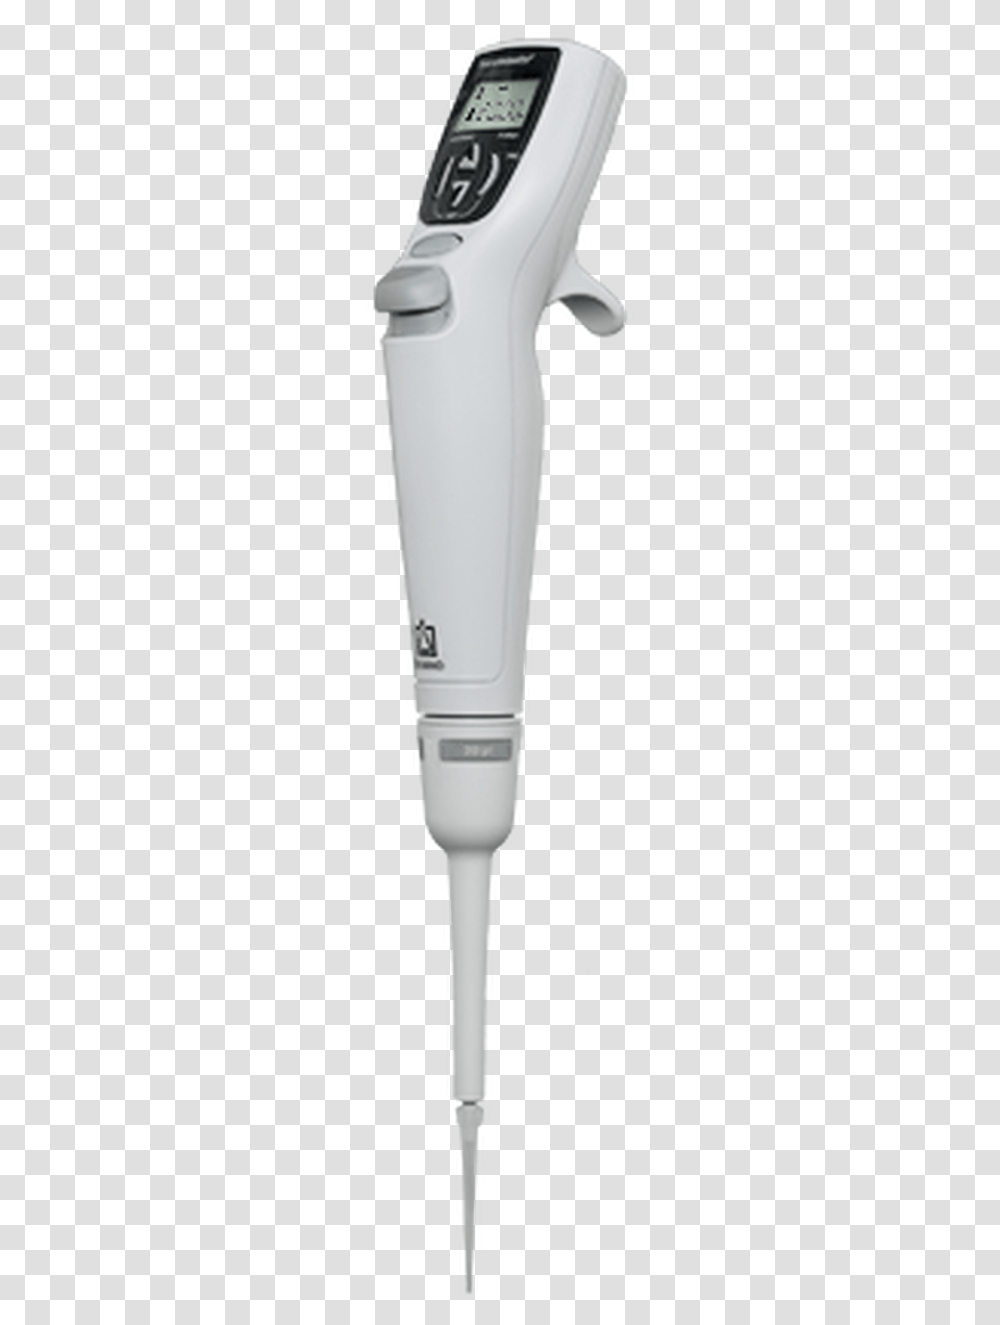 Transferpette Electronic Pipette 2 20ul With Charger Infrared Thermometer, Bottle, Shaker, Microphone, Electrical Device Transparent Png